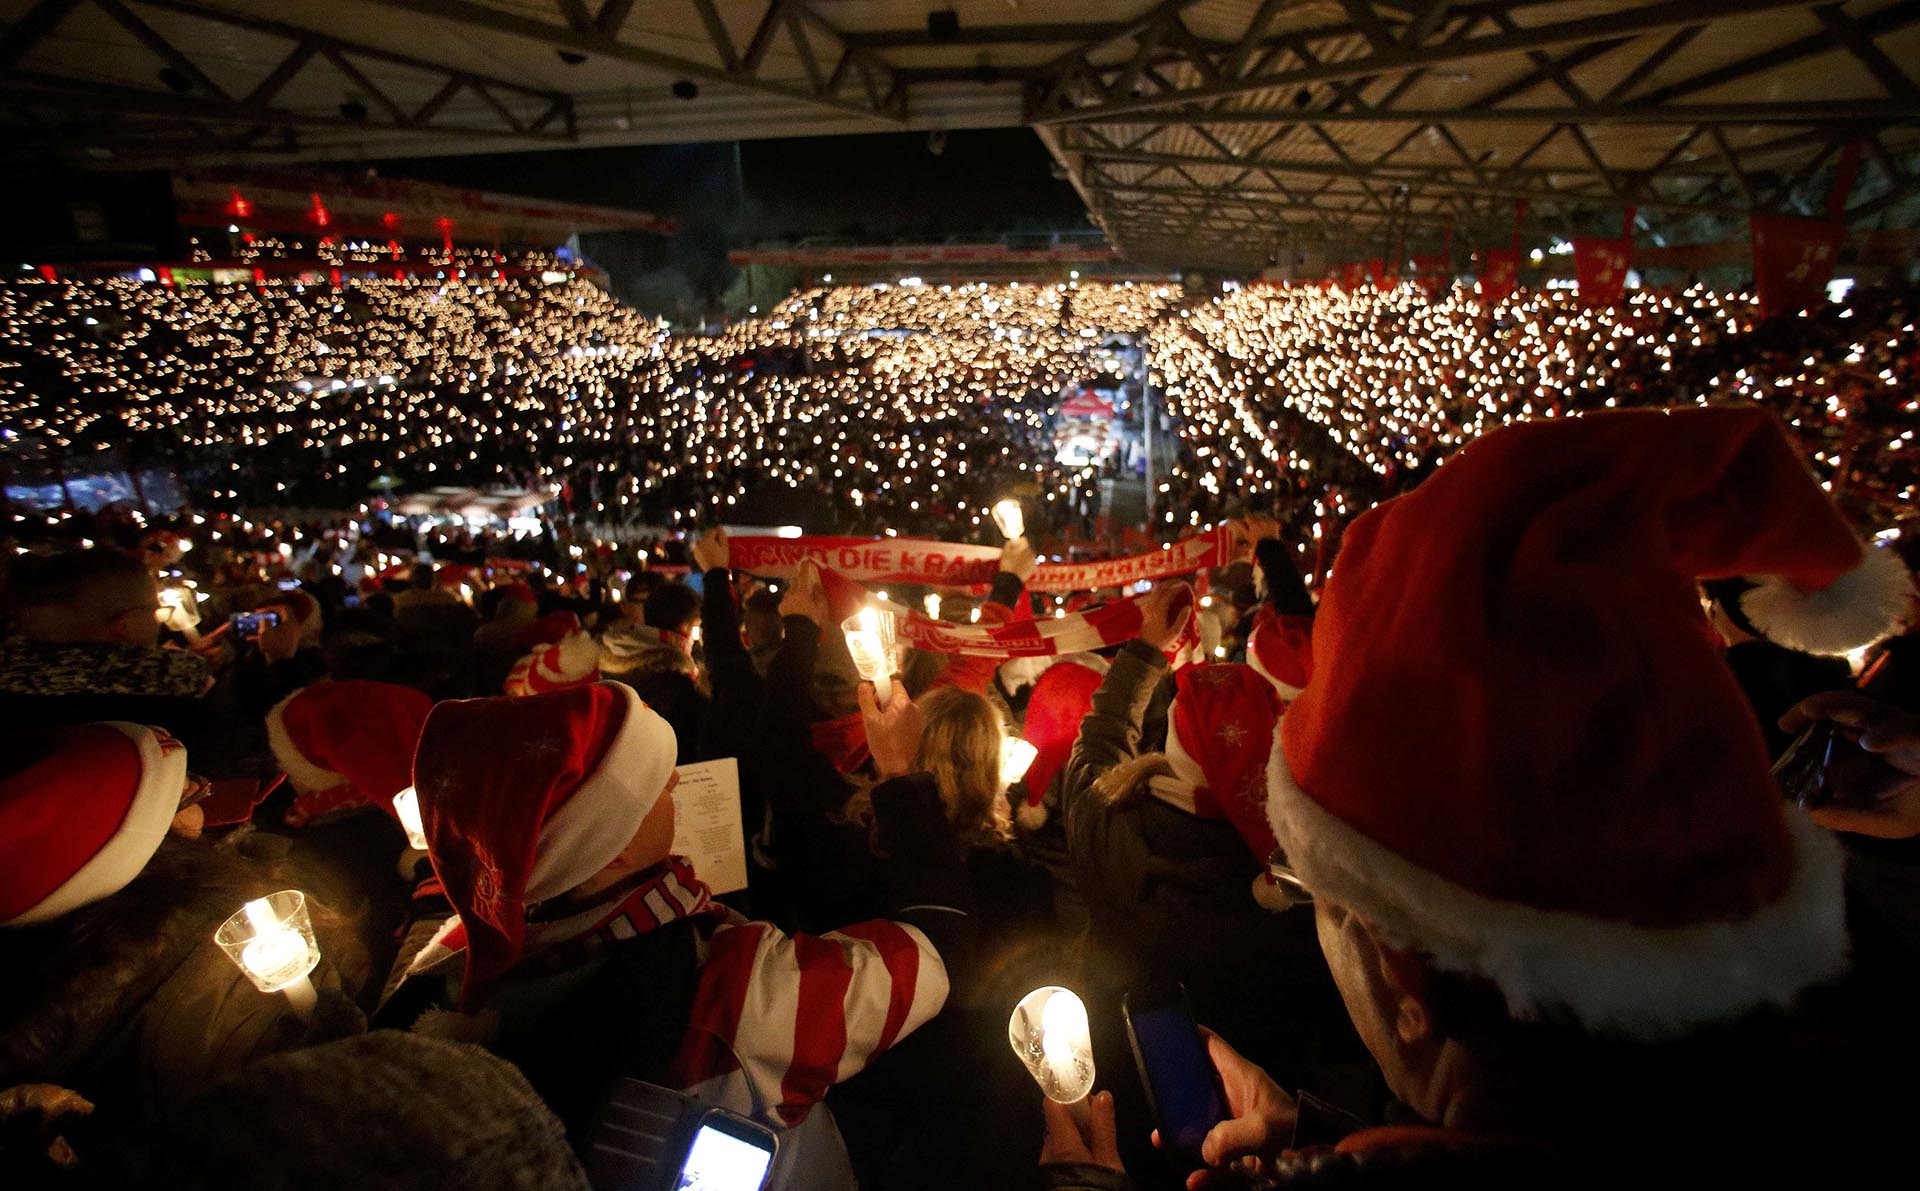 People attend the "Weihnachtssingen", a candle-lit carol concert with 28500 fans of the second-division club FC Union Berlin at the Alte Foersterei stadium in Berlin, Germany, December 23, 2016. REUTERS/Hannibal Hanschke